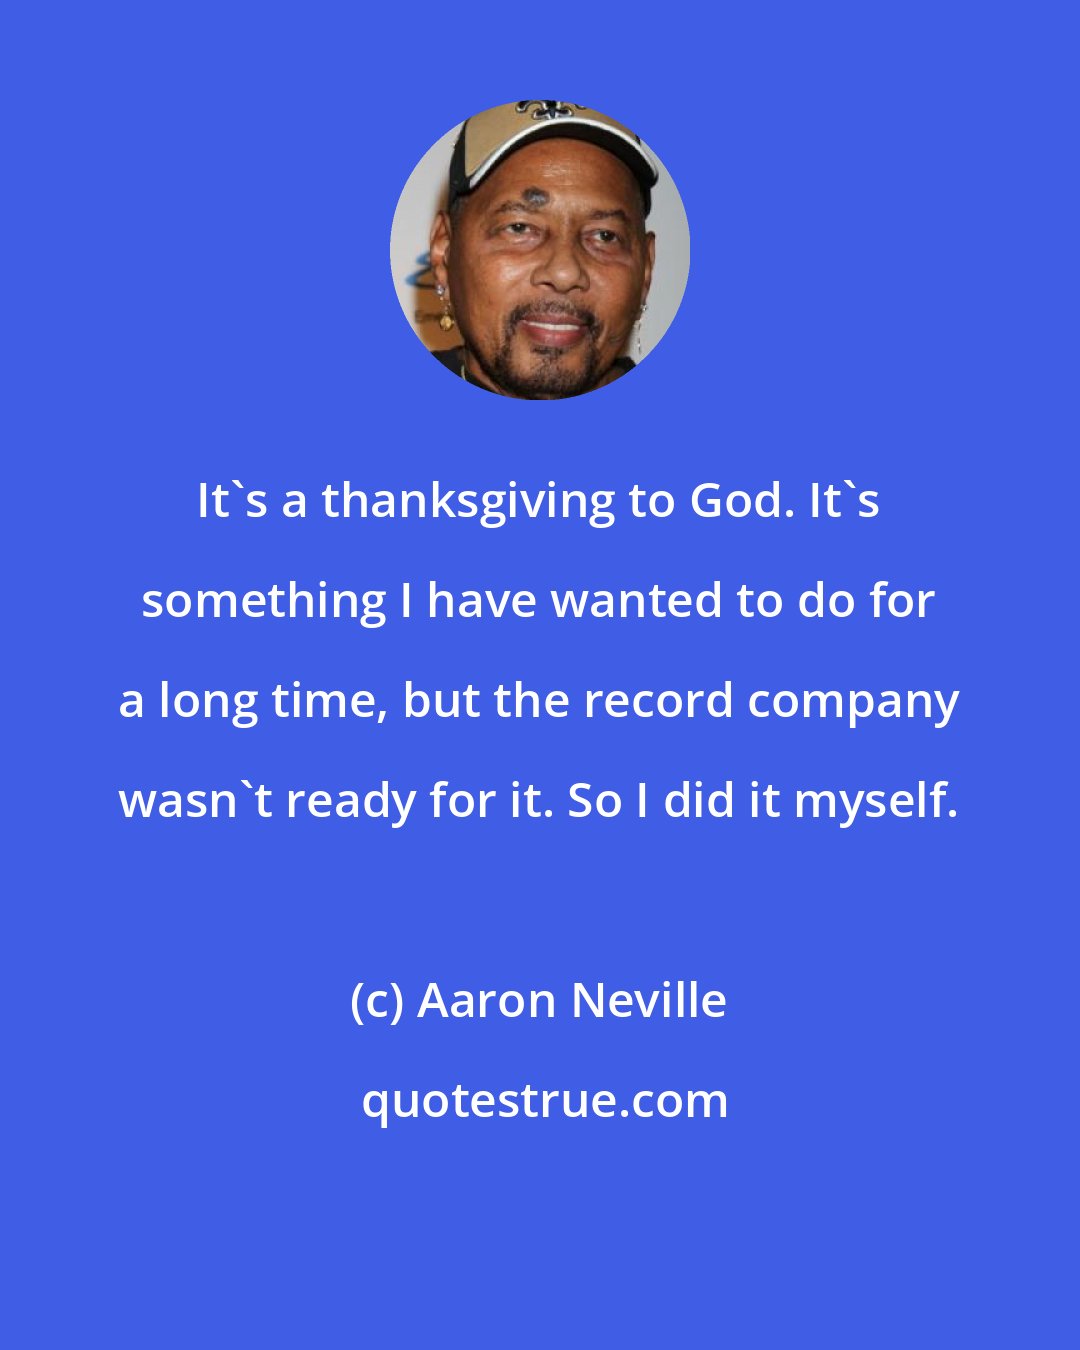 Aaron Neville: It's a thanksgiving to God. It's something I have wanted to do for a long time, but the record company wasn't ready for it. So I did it myself.